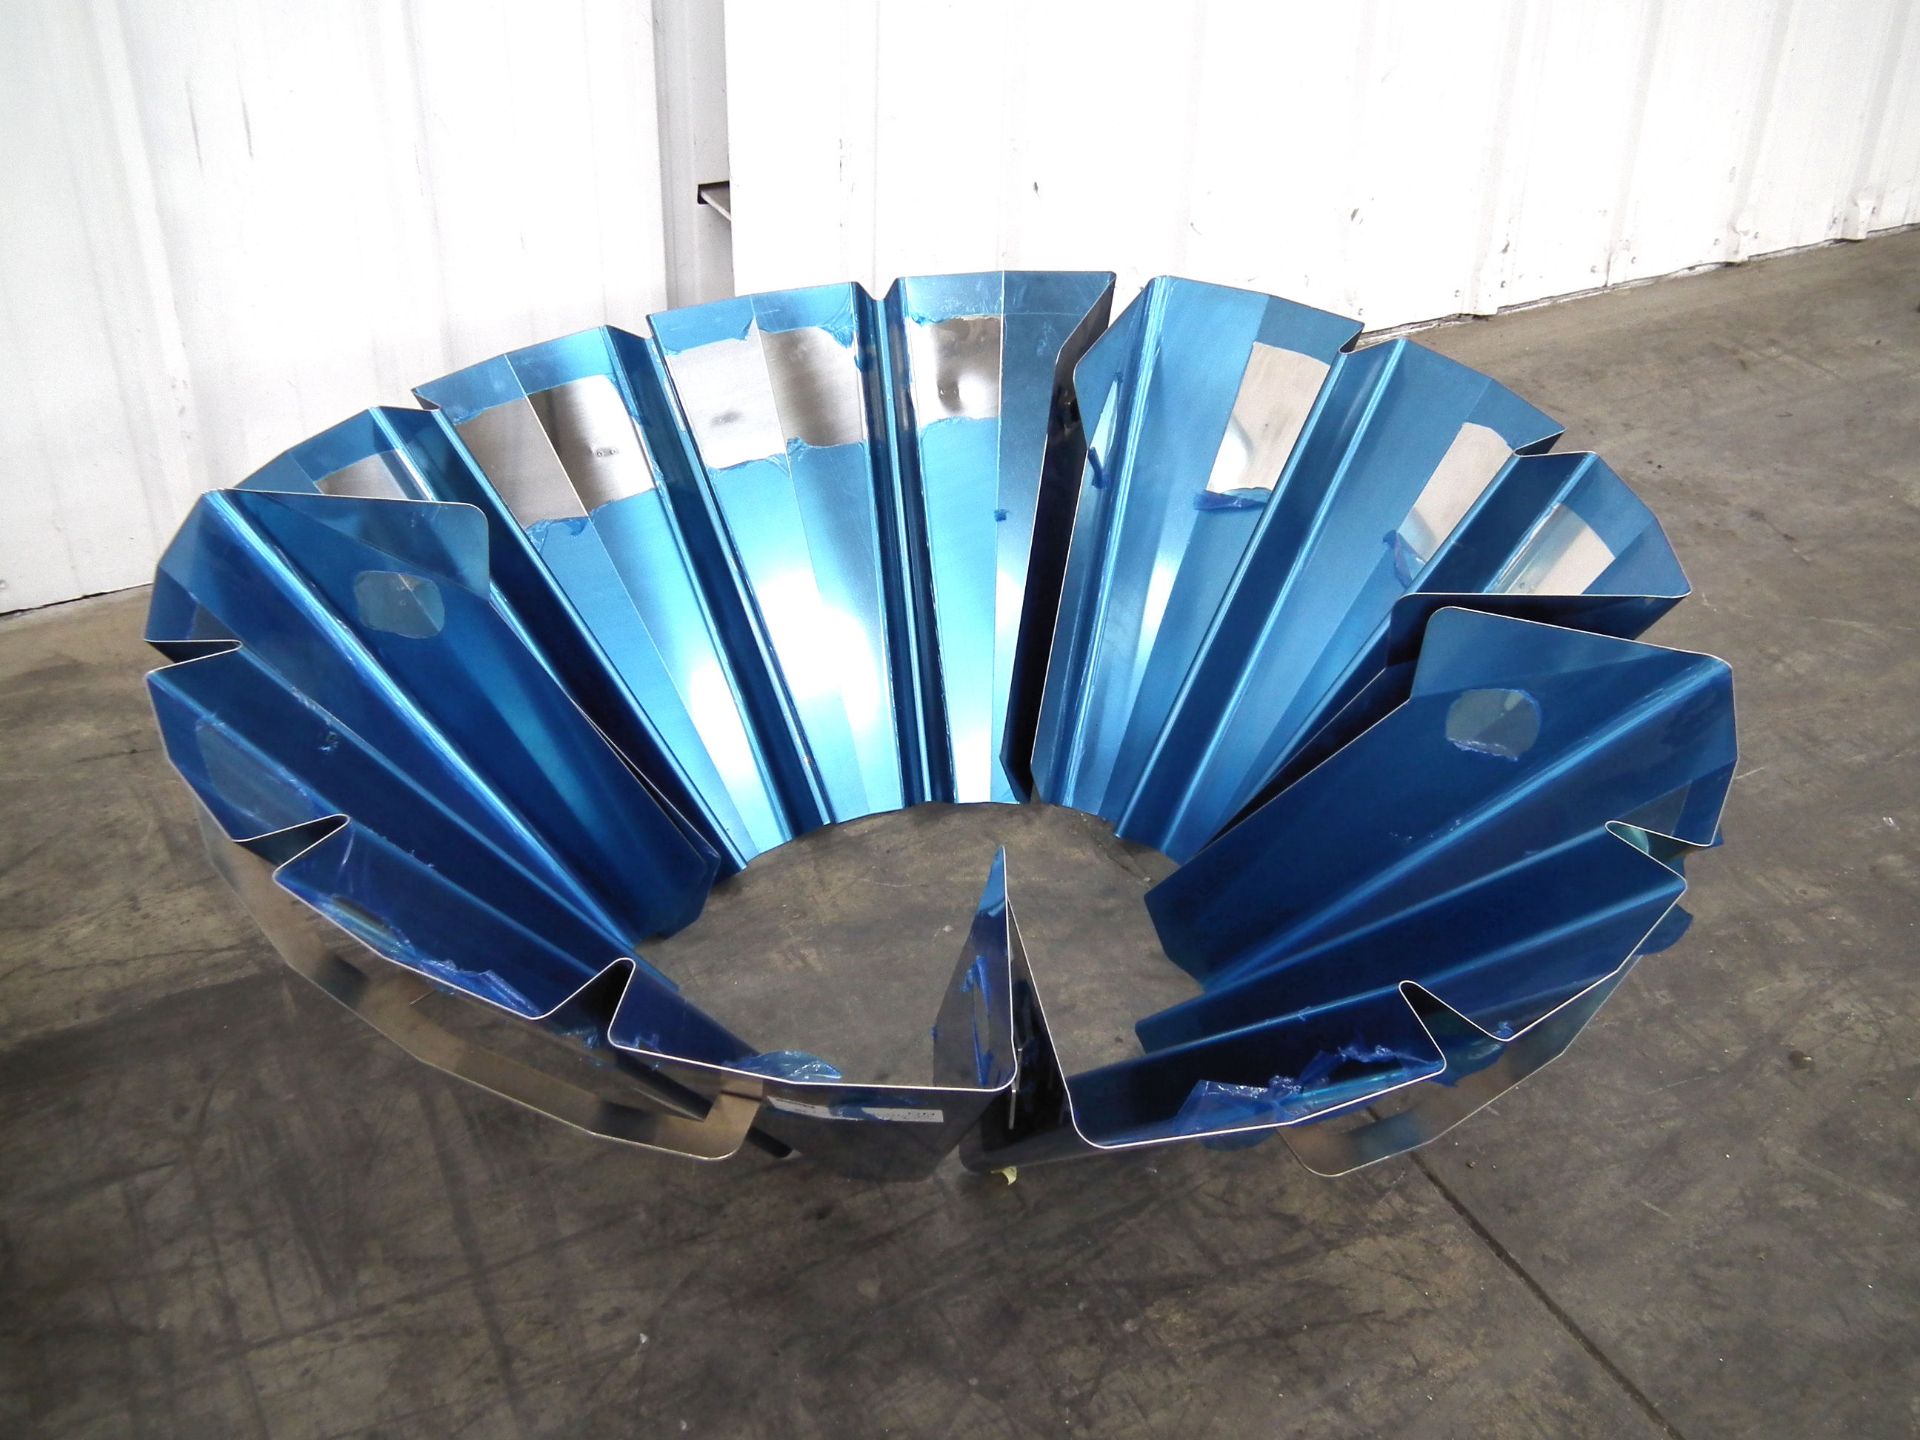 Ishida 14 Head Scale Buckets and Cones for CCW-214 - Image 9 of 10